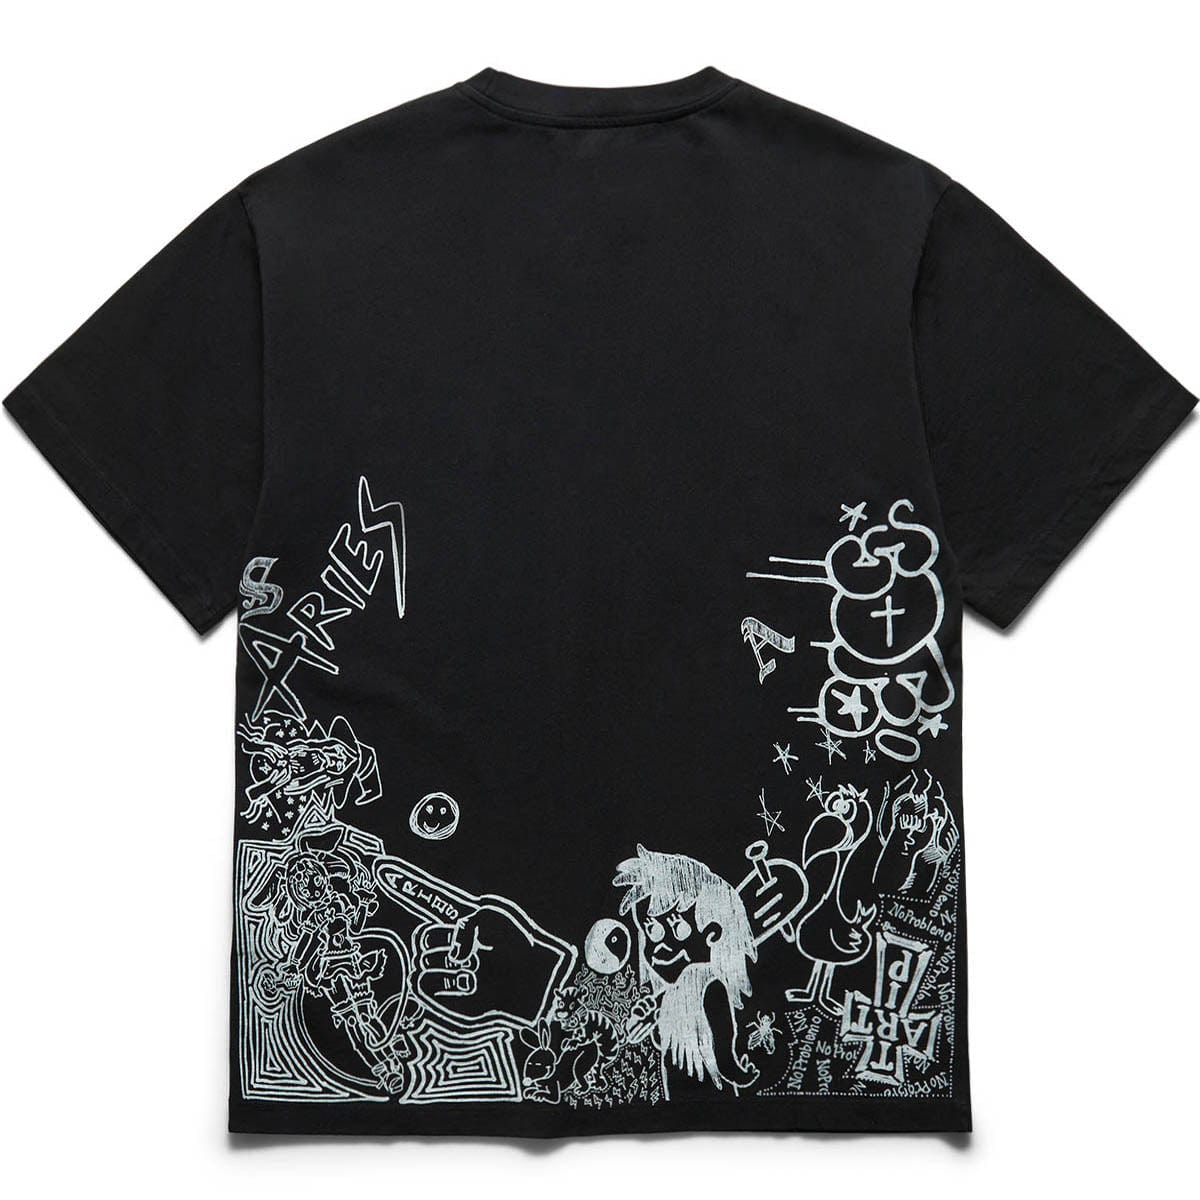 Aries T-Shirts DOODLE S/S TEE